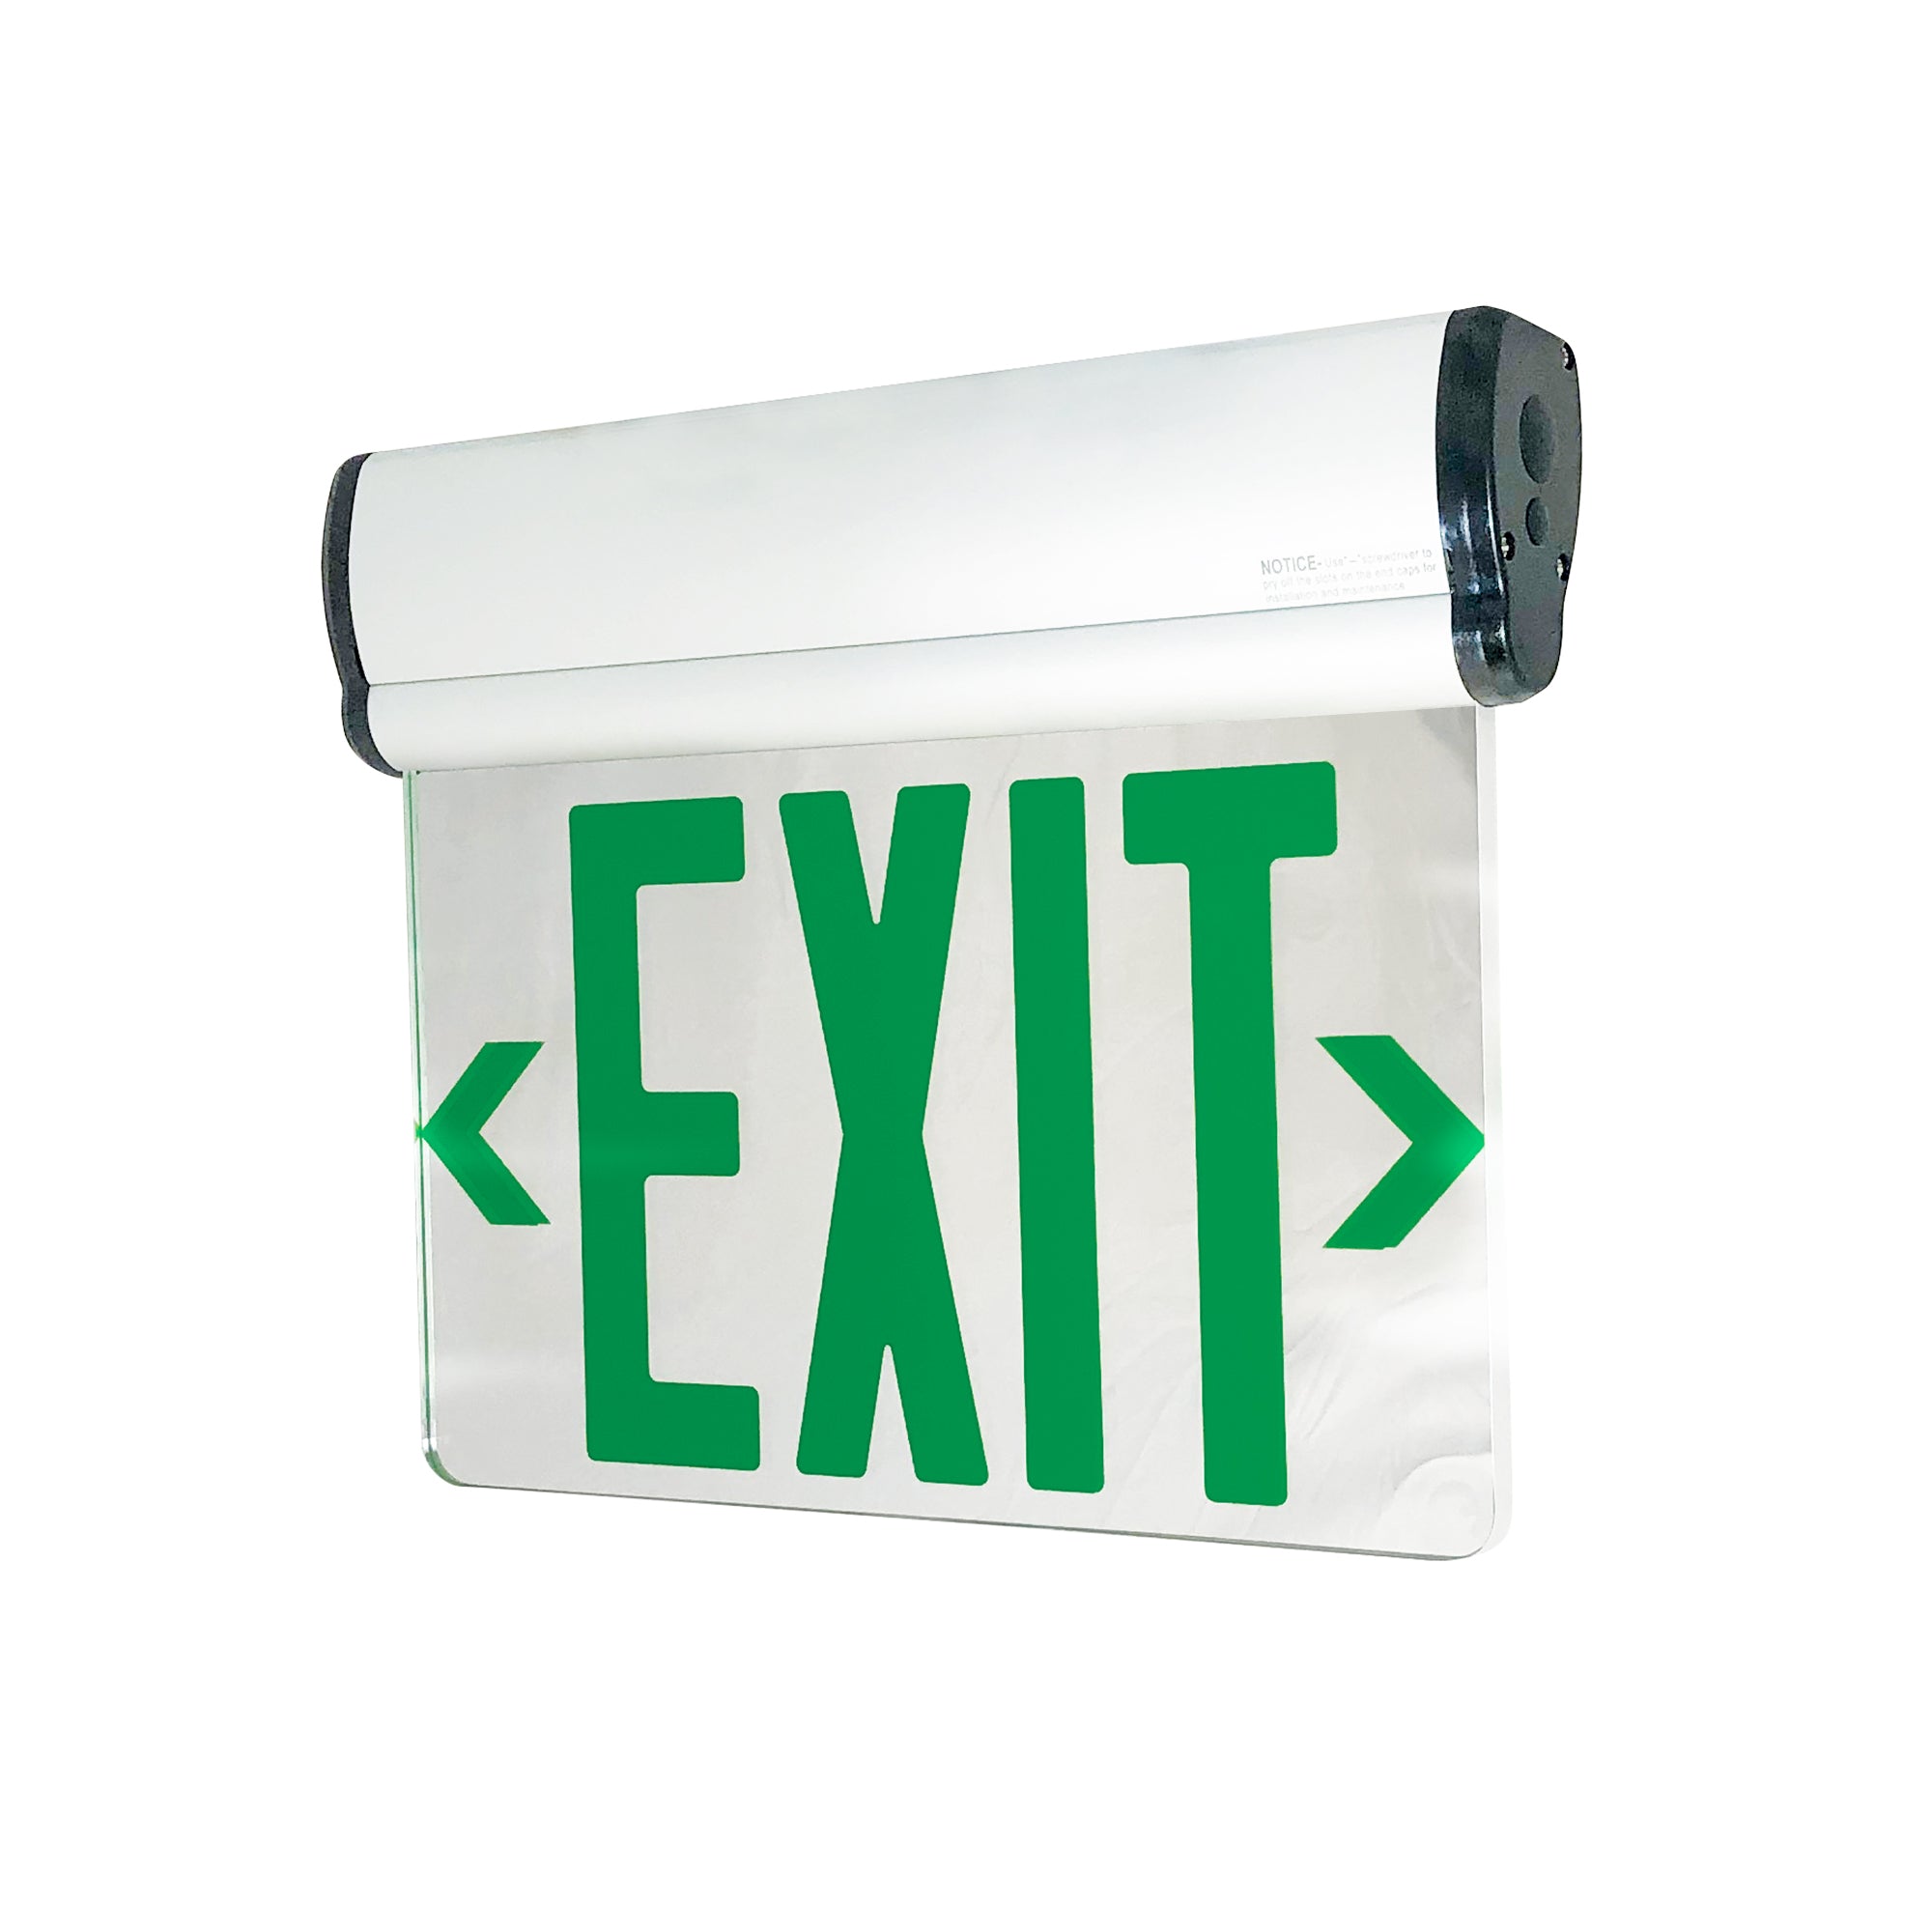 Nora Lighting NX-812-LEDG2MW - Exit / Emergency - Surface Adjustable LED Edge-Lit Exit Sign, Battery Backup, 6 Inch Green Letters, Double Face / Mirrored Acrylic, White Housing